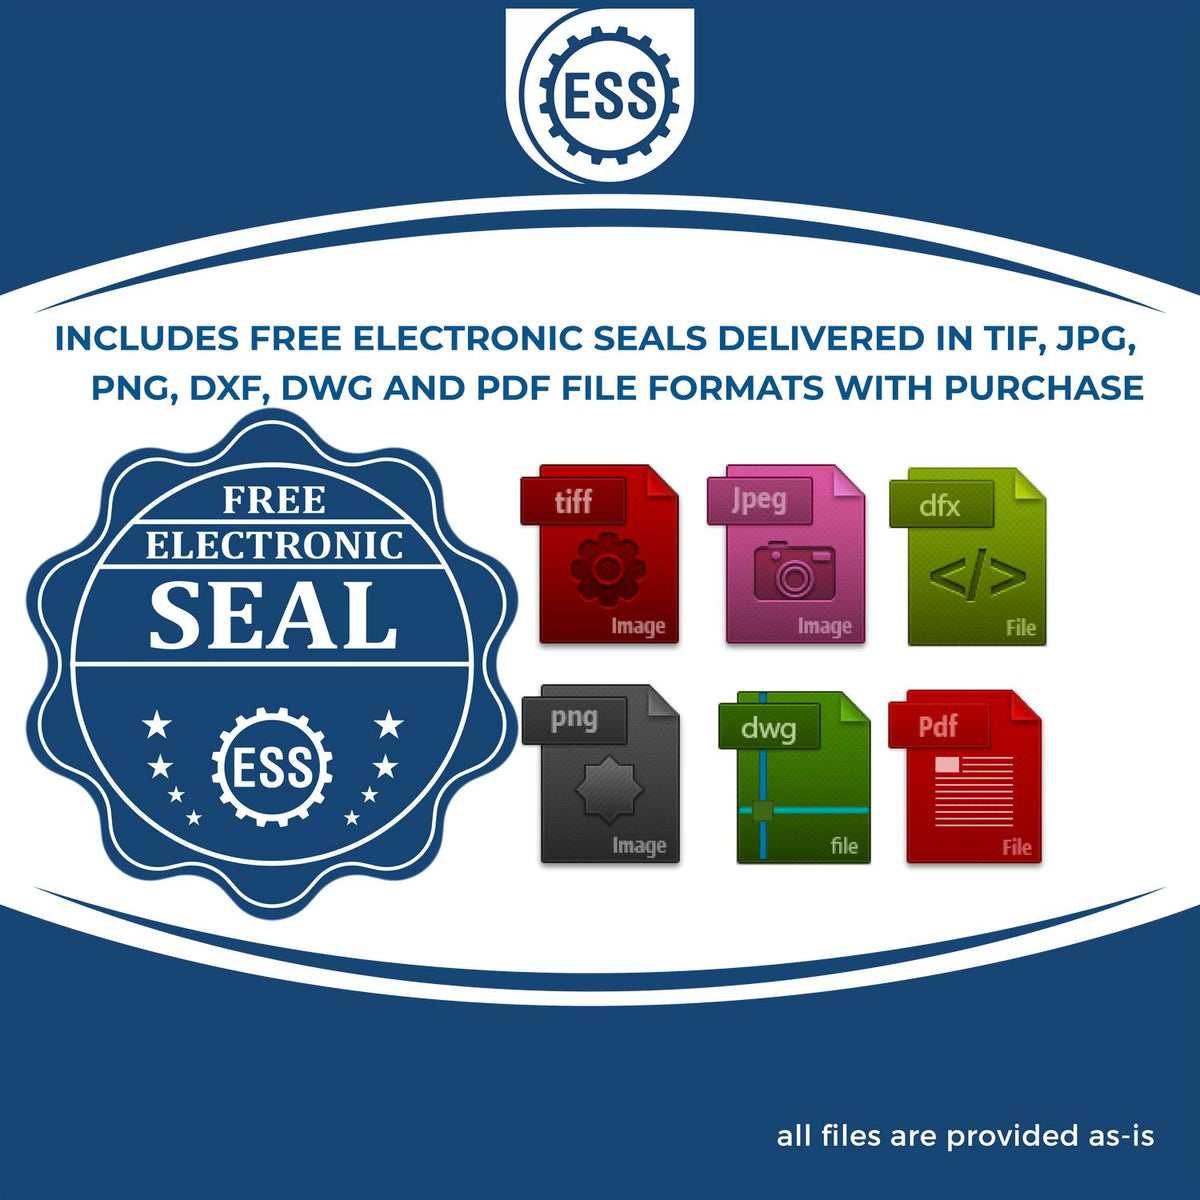 An infographic for the free electronic seal for the State of Utah Extended Long Reach Engineer Seal illustrating the different file type icons such as DXF, DWG, TIF, JPG and PNG.